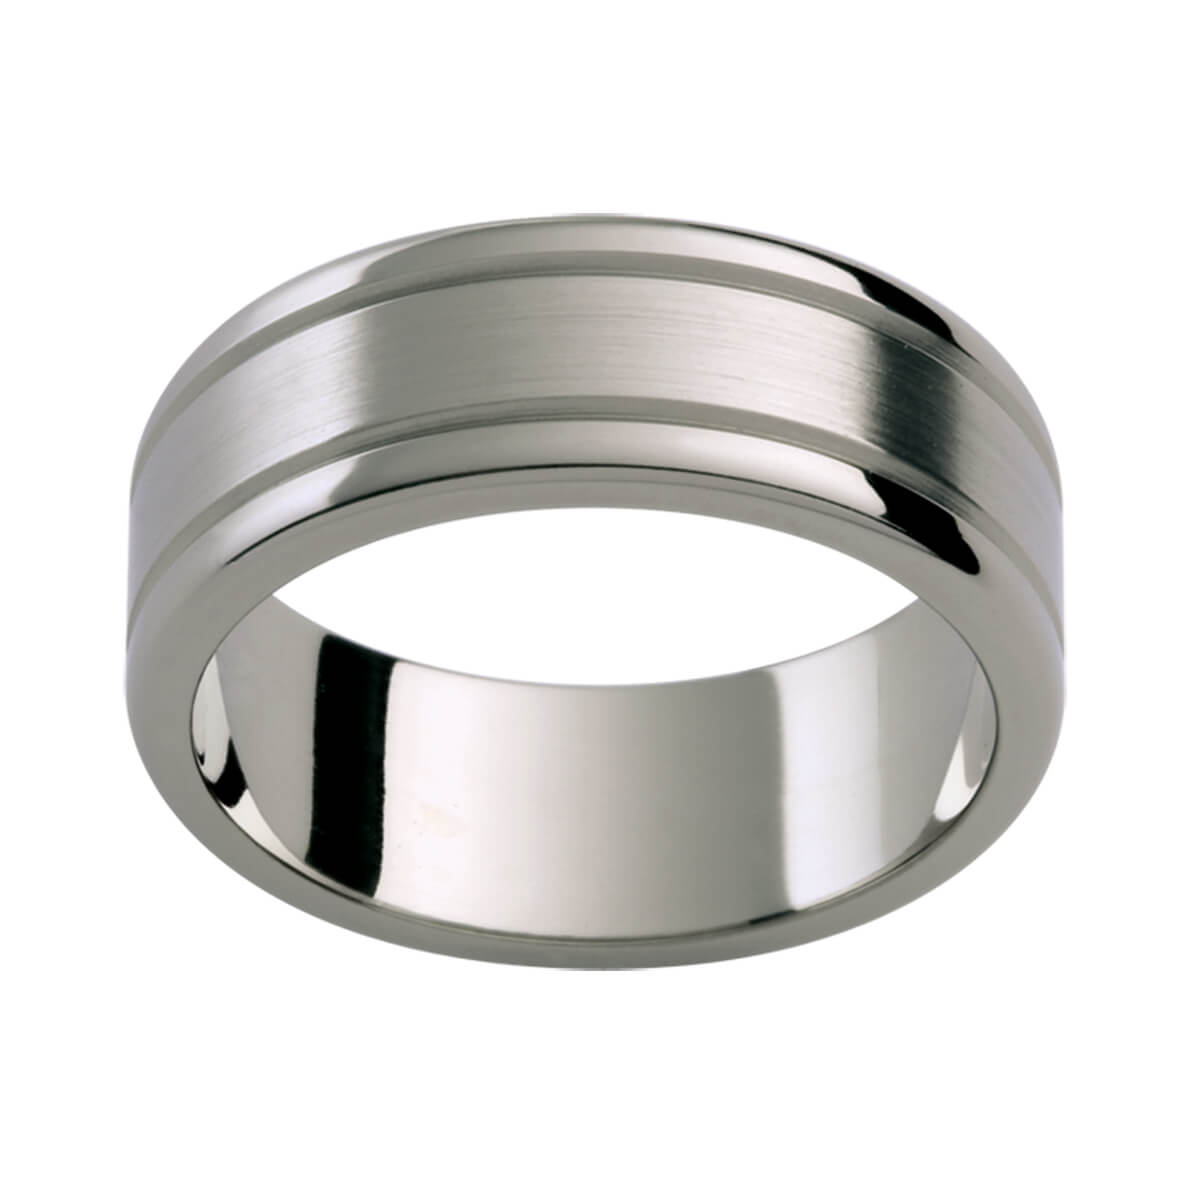 Ti43B Flat Titanium Band With Polished Edges And Emery Finish With Grooved Lines